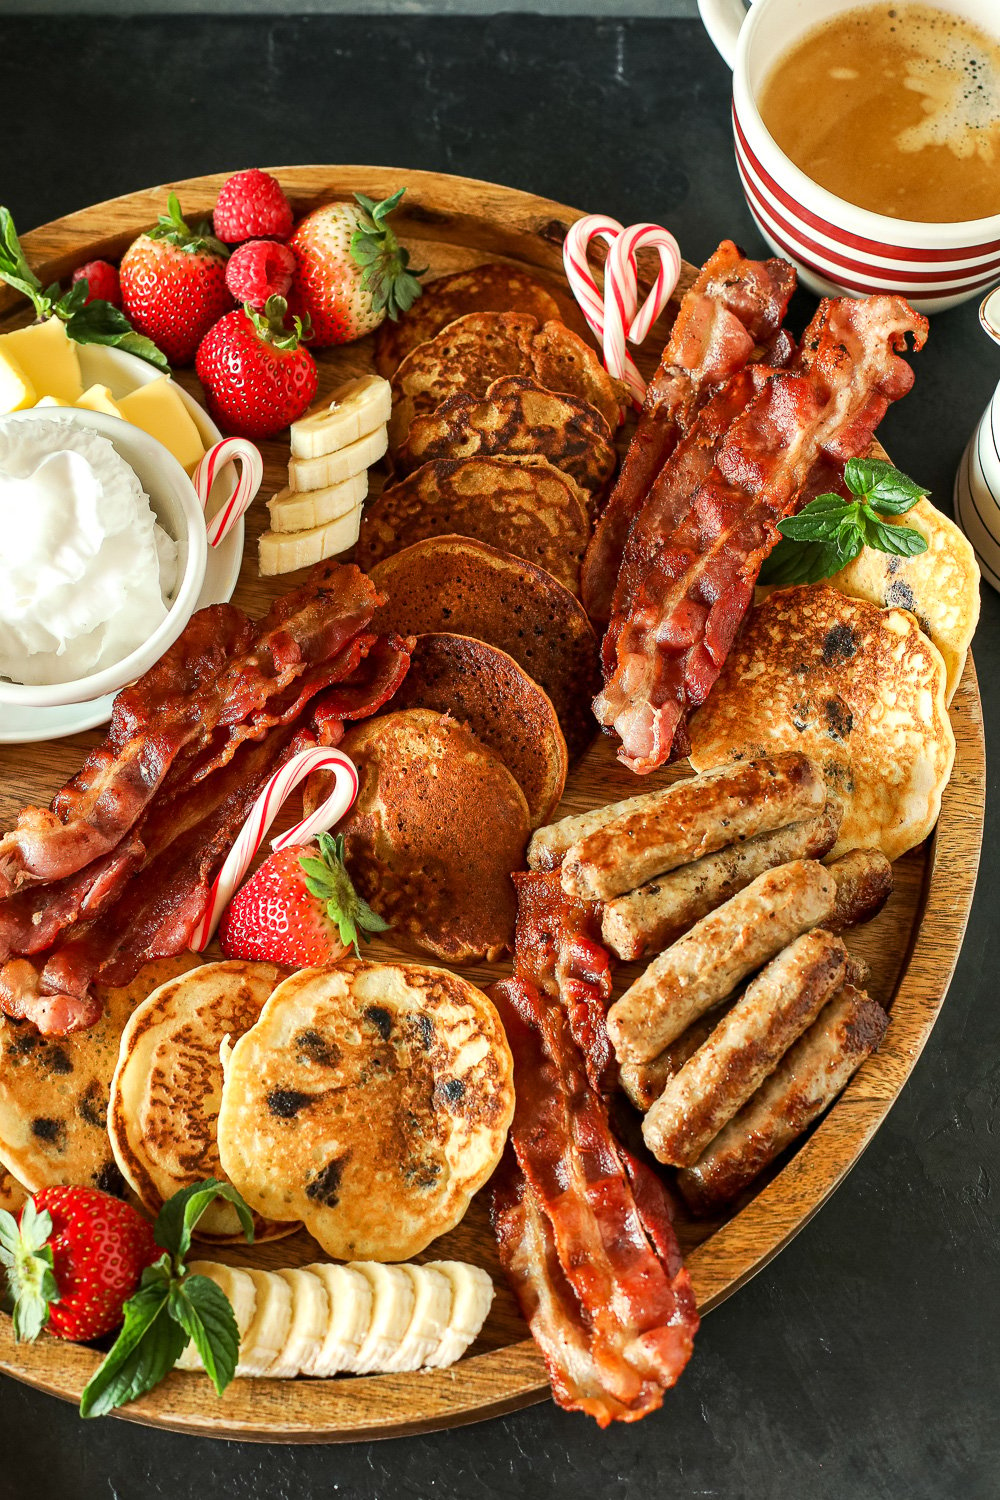 This Christmas Breakfast Board is such a fun and simple way to celebrate on christmas morning. Kid's love getting to pick what they want to build their plate!